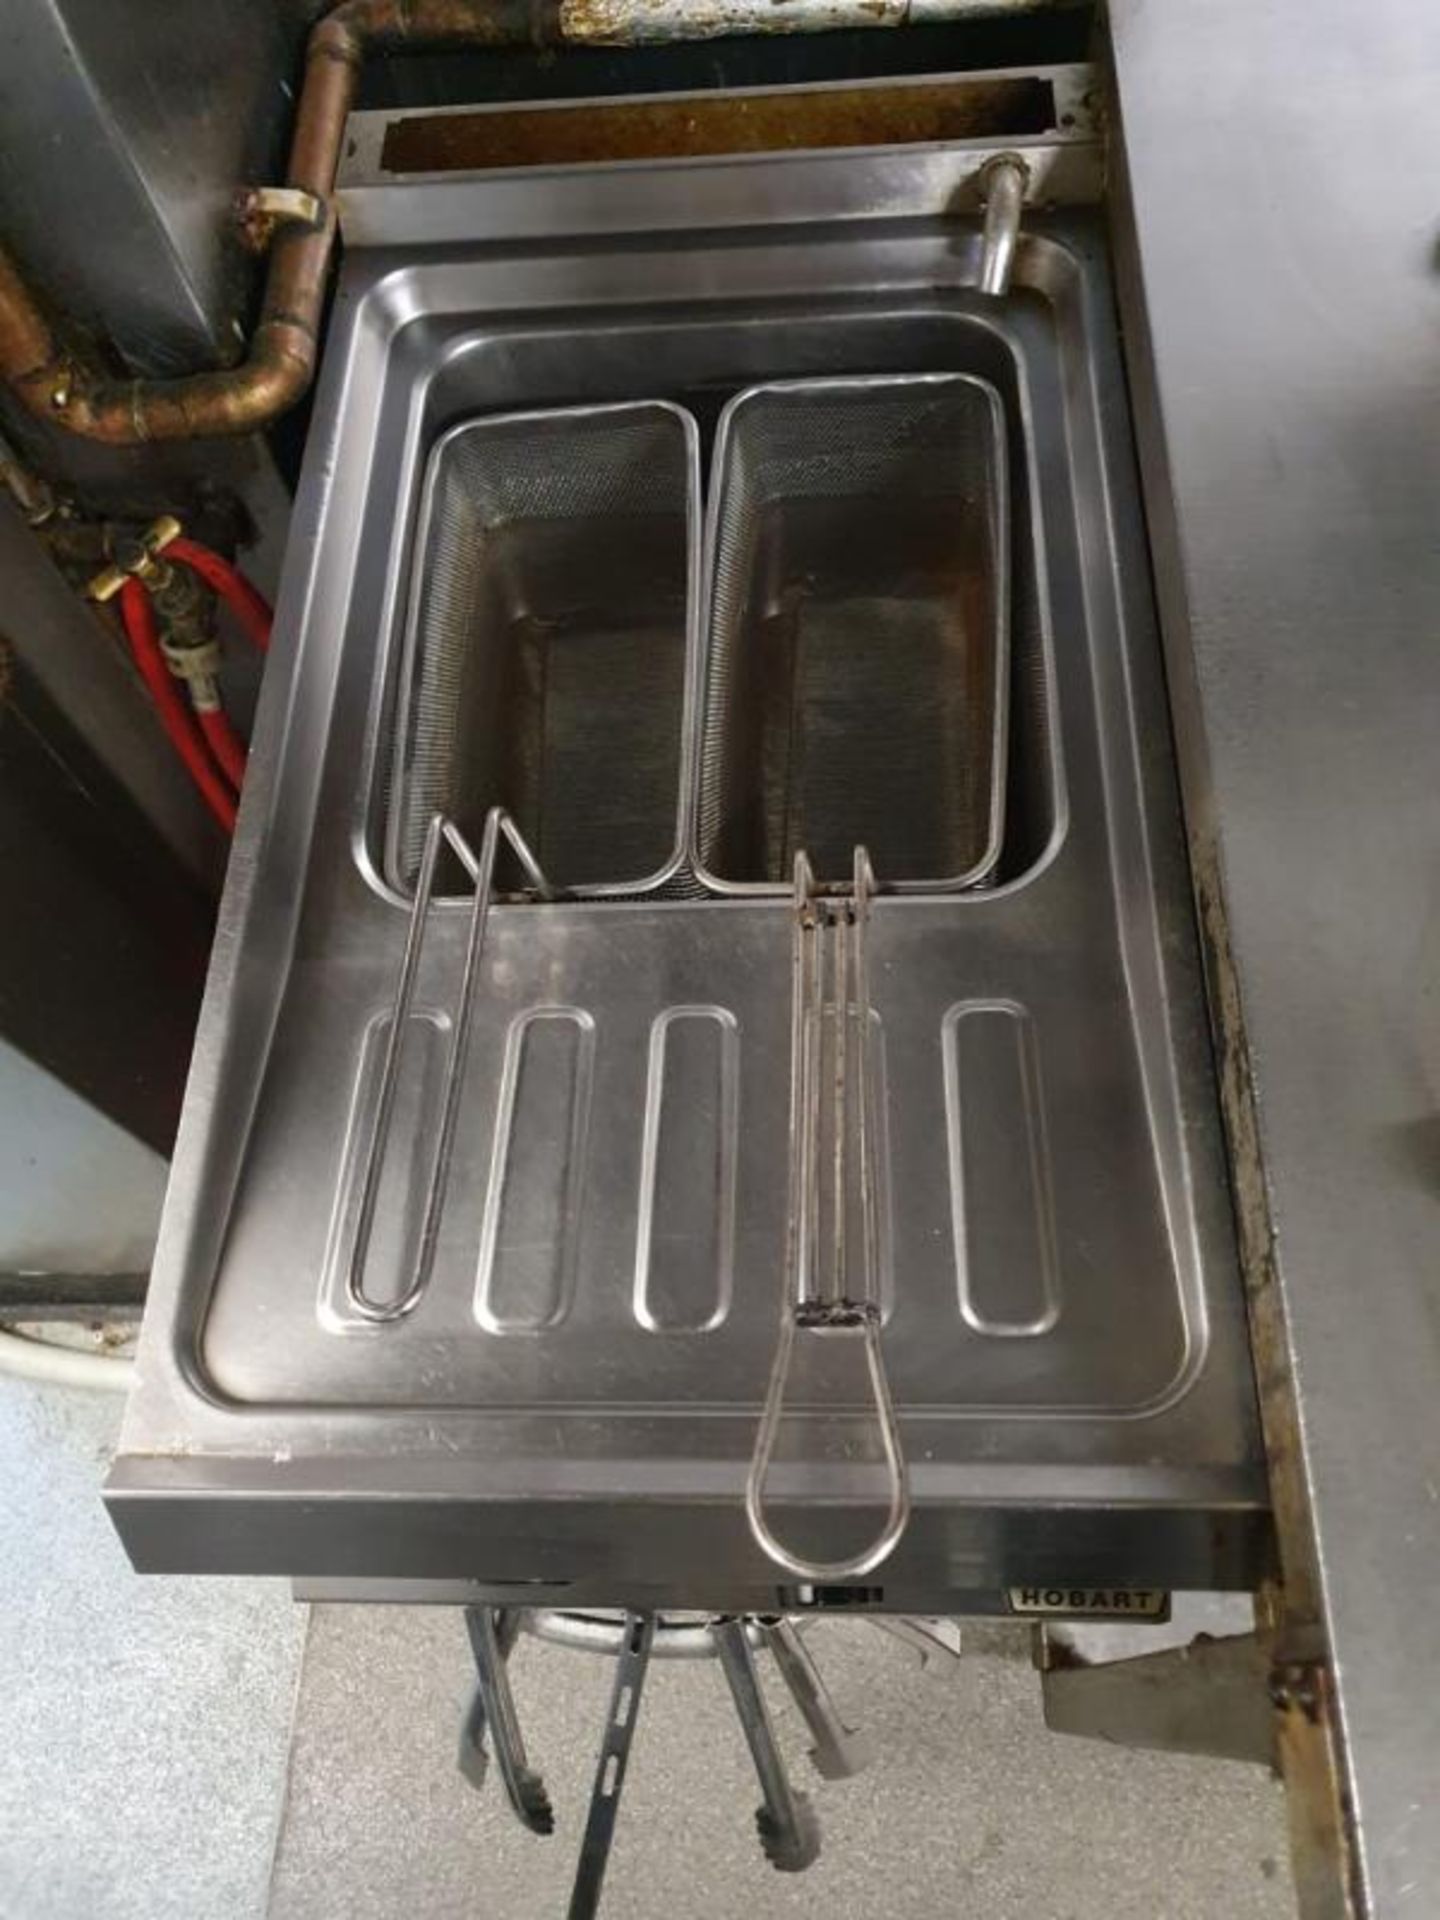 1 x Hobart Twin Basket Pasta Boiler - Stainless Steel Finish - CL514 - Approx Dimensions H118 x W40 - Image 3 of 4